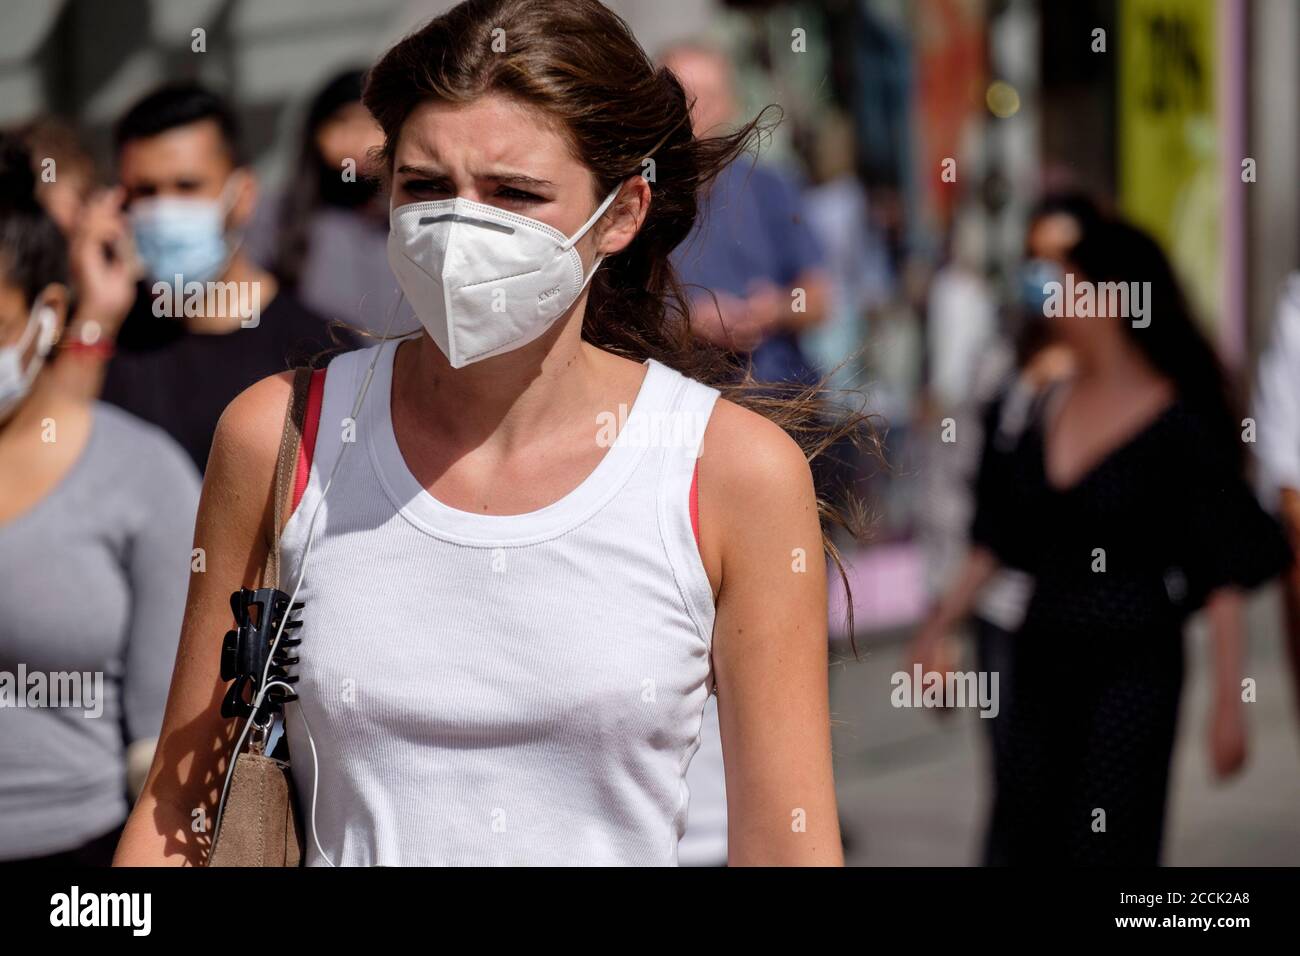 Young woman wearing face mask on busy street, London, UK Stock Photo